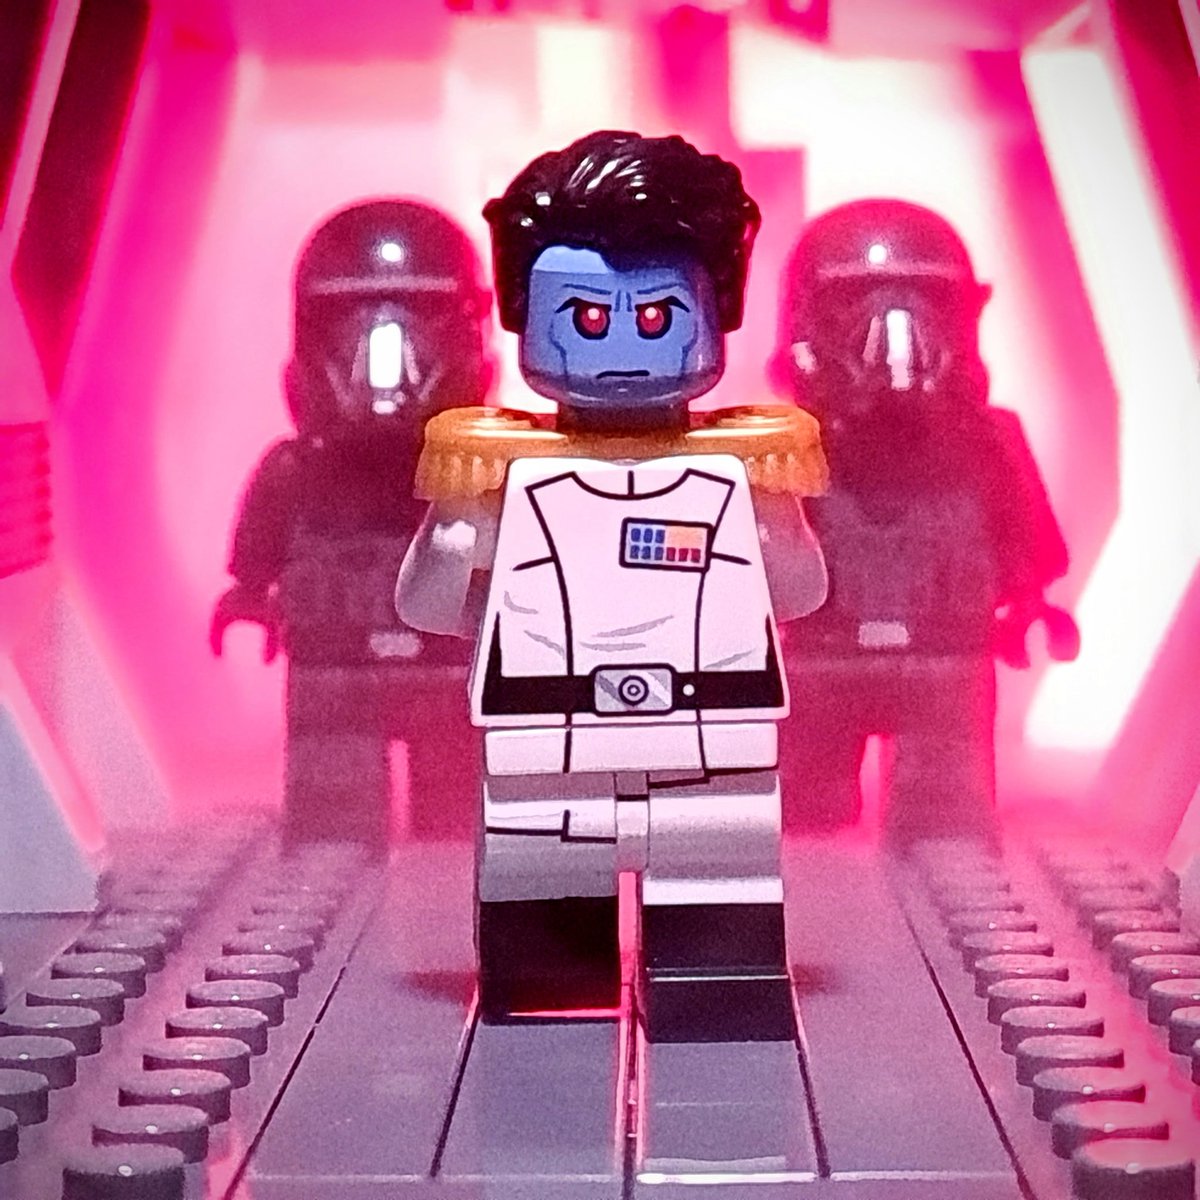 'To Defeat An Enemy, You Must Know Them. Not Simply Their Battle Tactics, But Their History, Philosophy, Art.' - Grand Admiral Thrawn 

#toyphotography #LEGO #LegoStarWars #StarWars